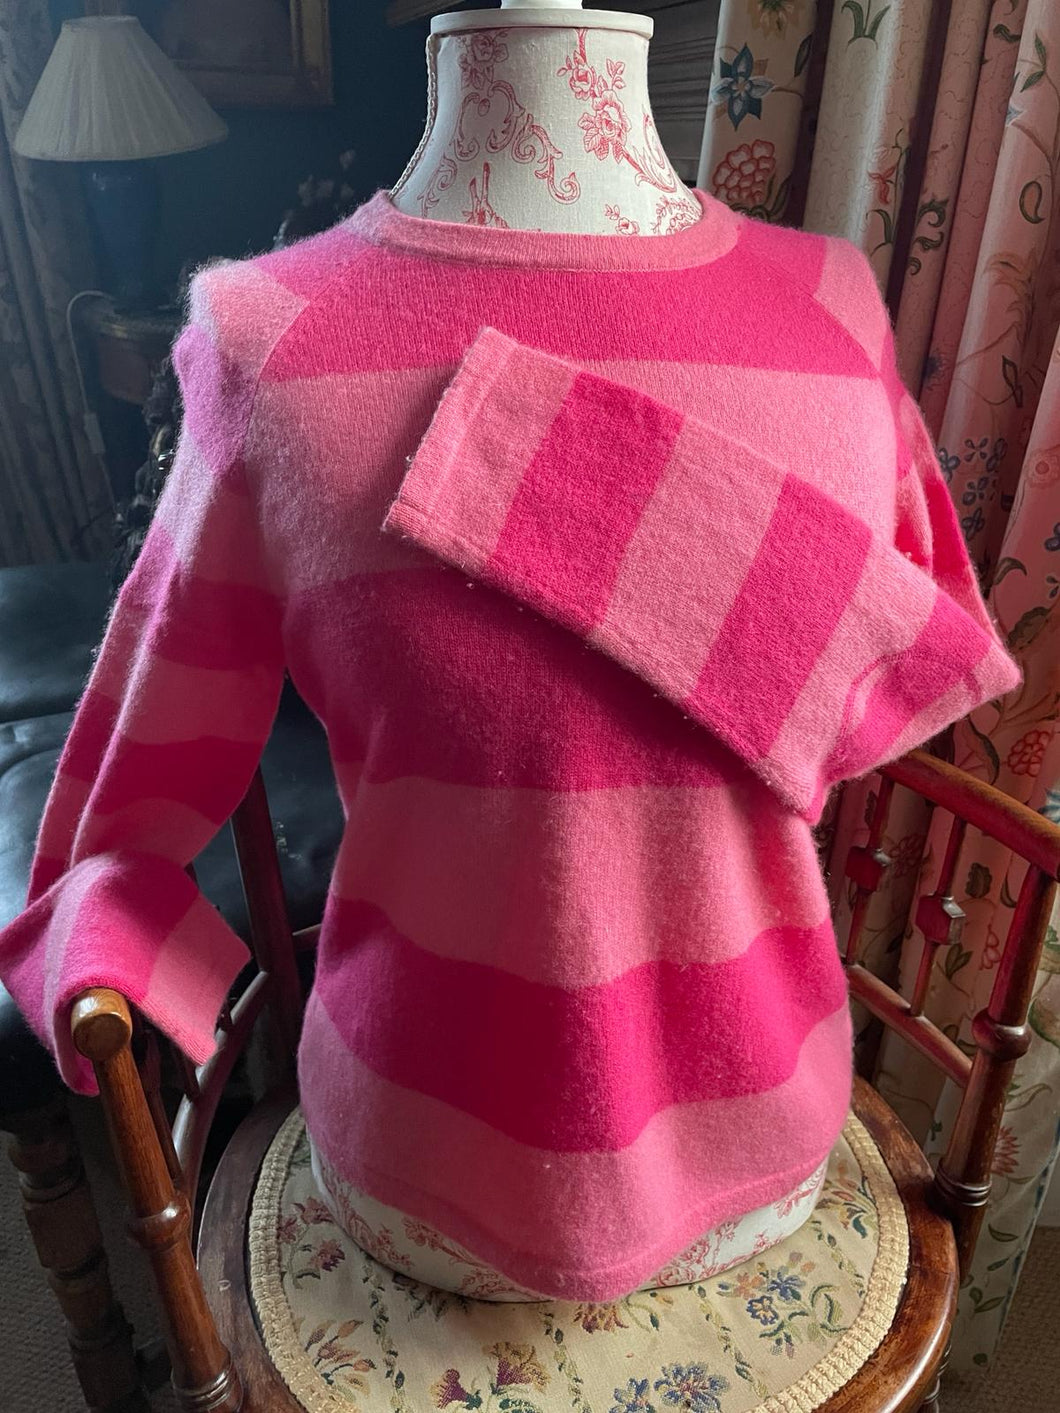 Clements Ribeiro designer Crew Neck in bright pink and paler pink, Size S/M